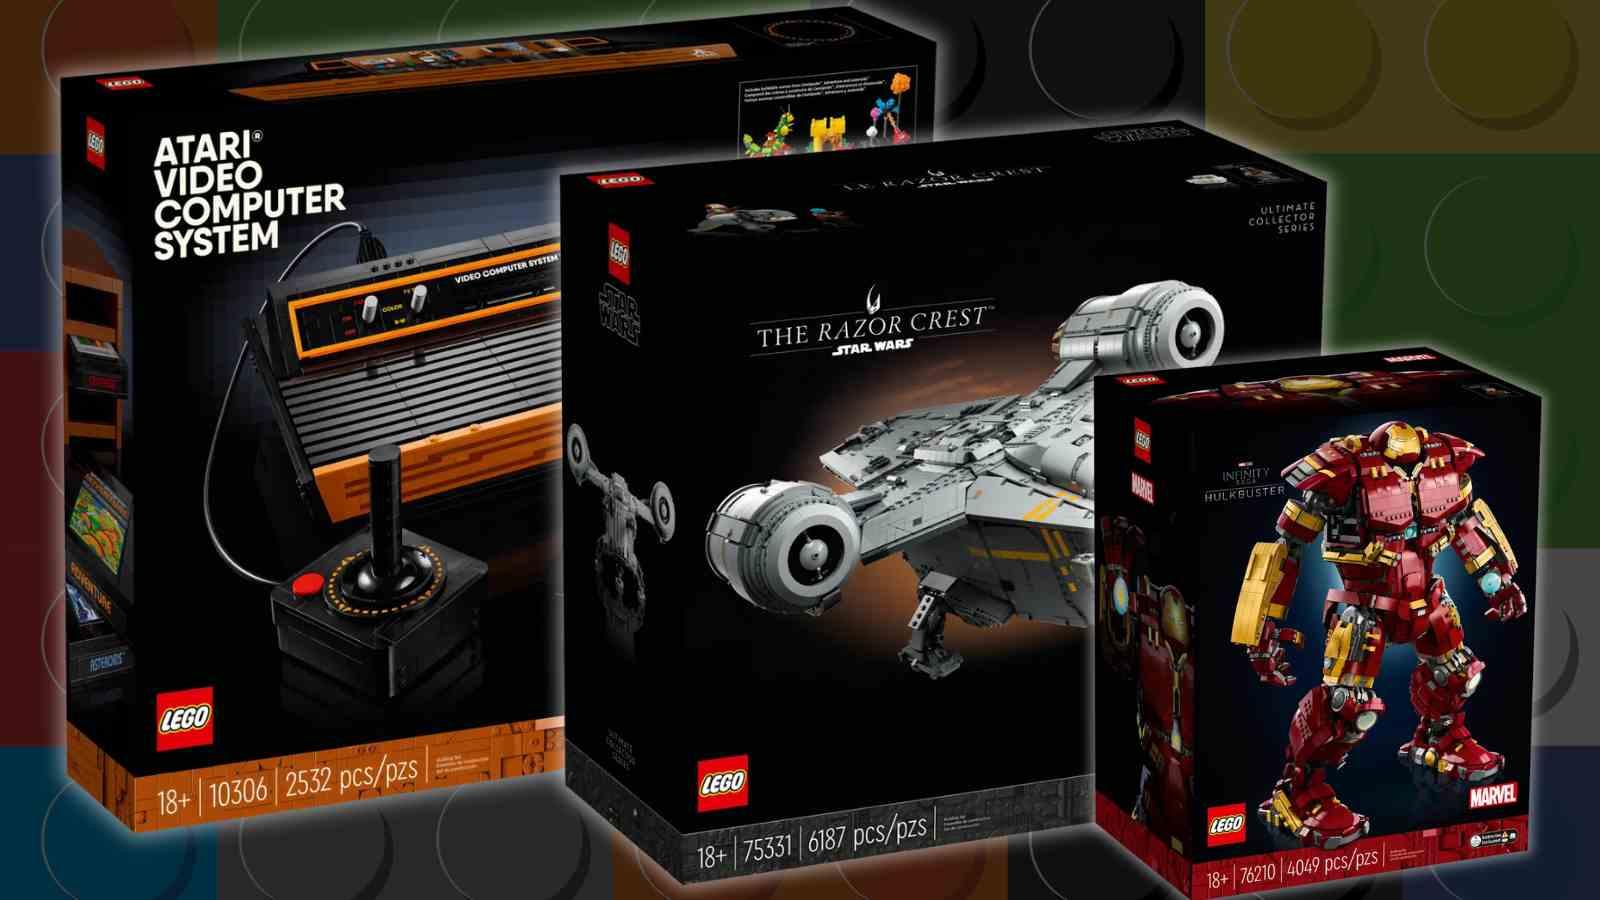 Three of the LEGO sets available at great deals at several stores